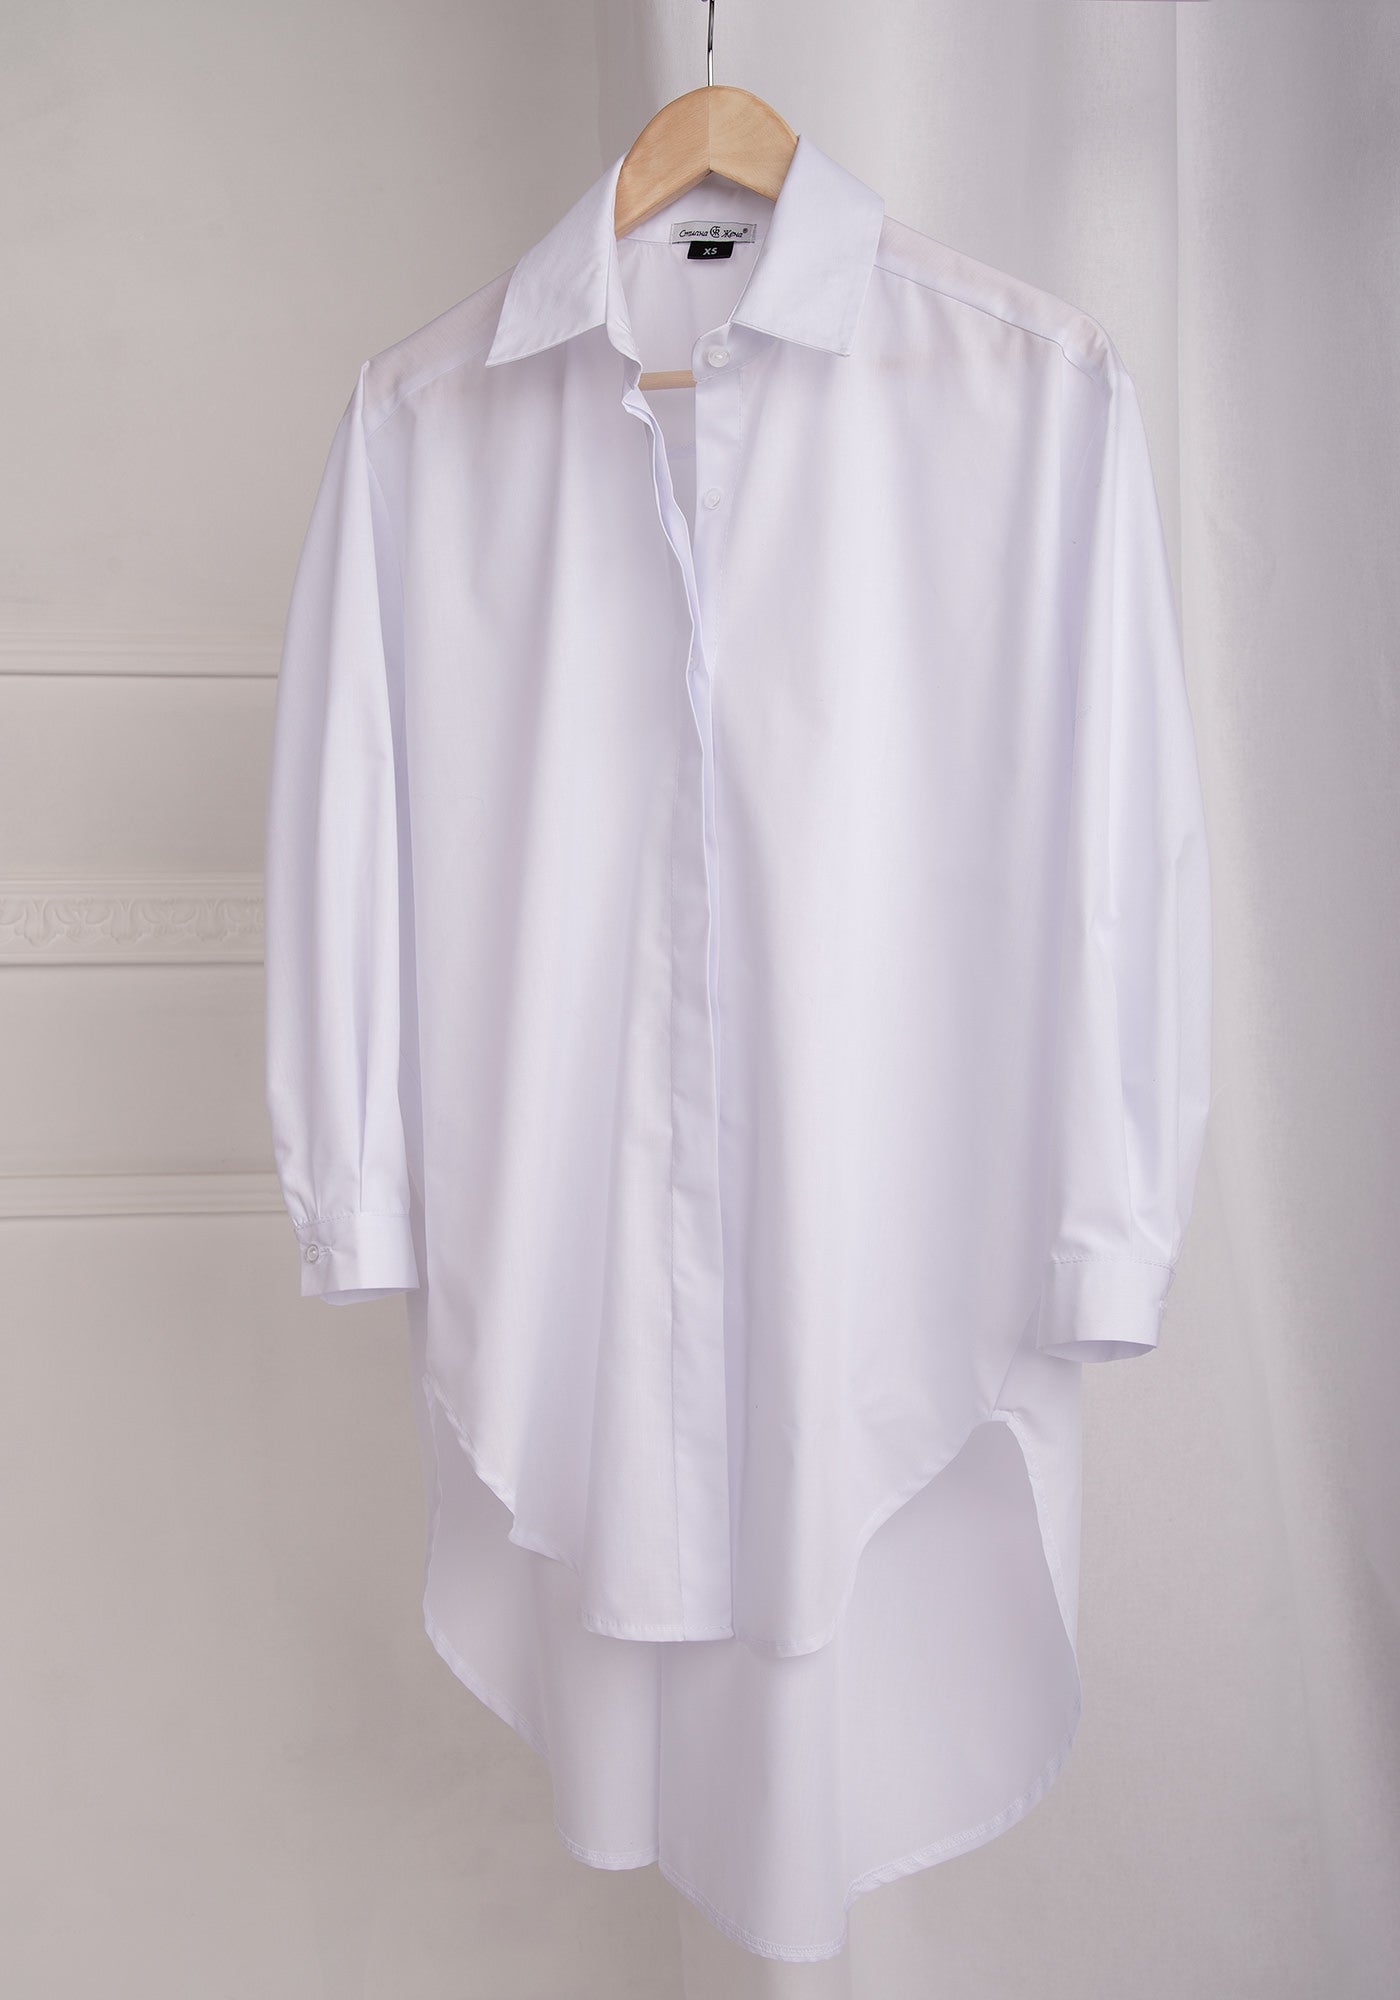 Women's Oversized Button up Shirt in White Cotton Blend